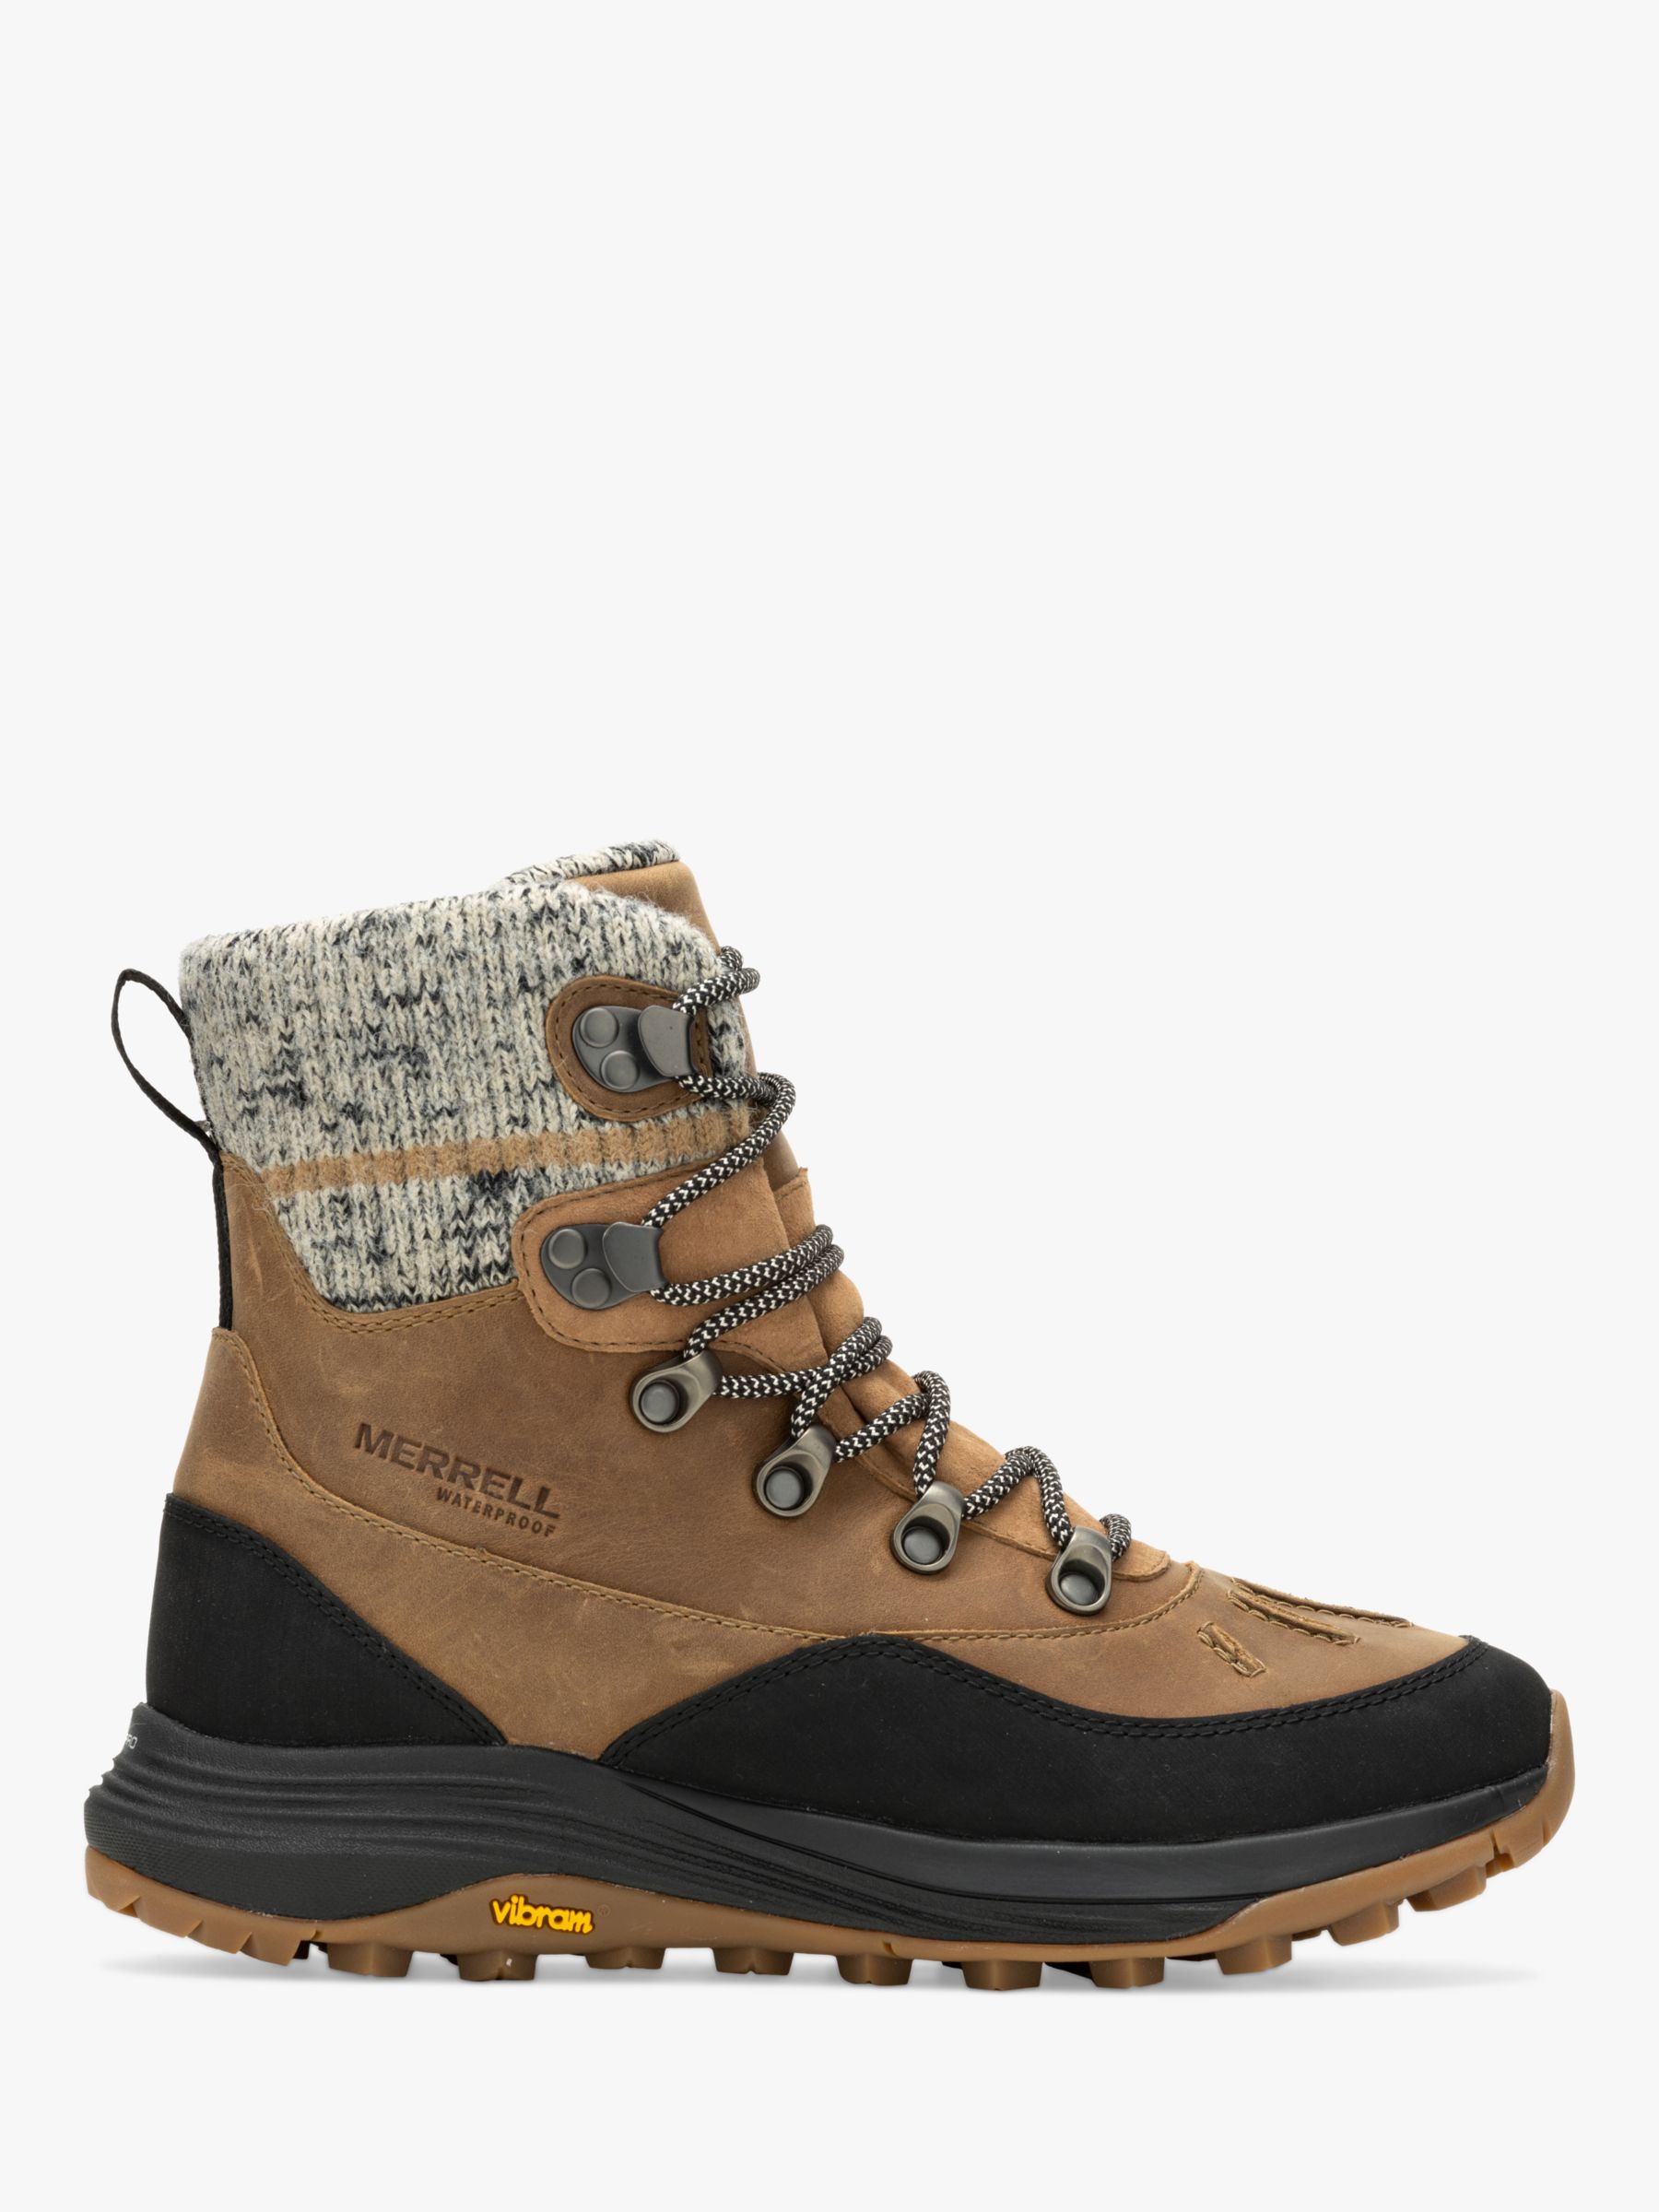 Merrell Siren 4 Thermo Women's Waterproof Hiking Boots, Tobacco at John  Lewis & Partners